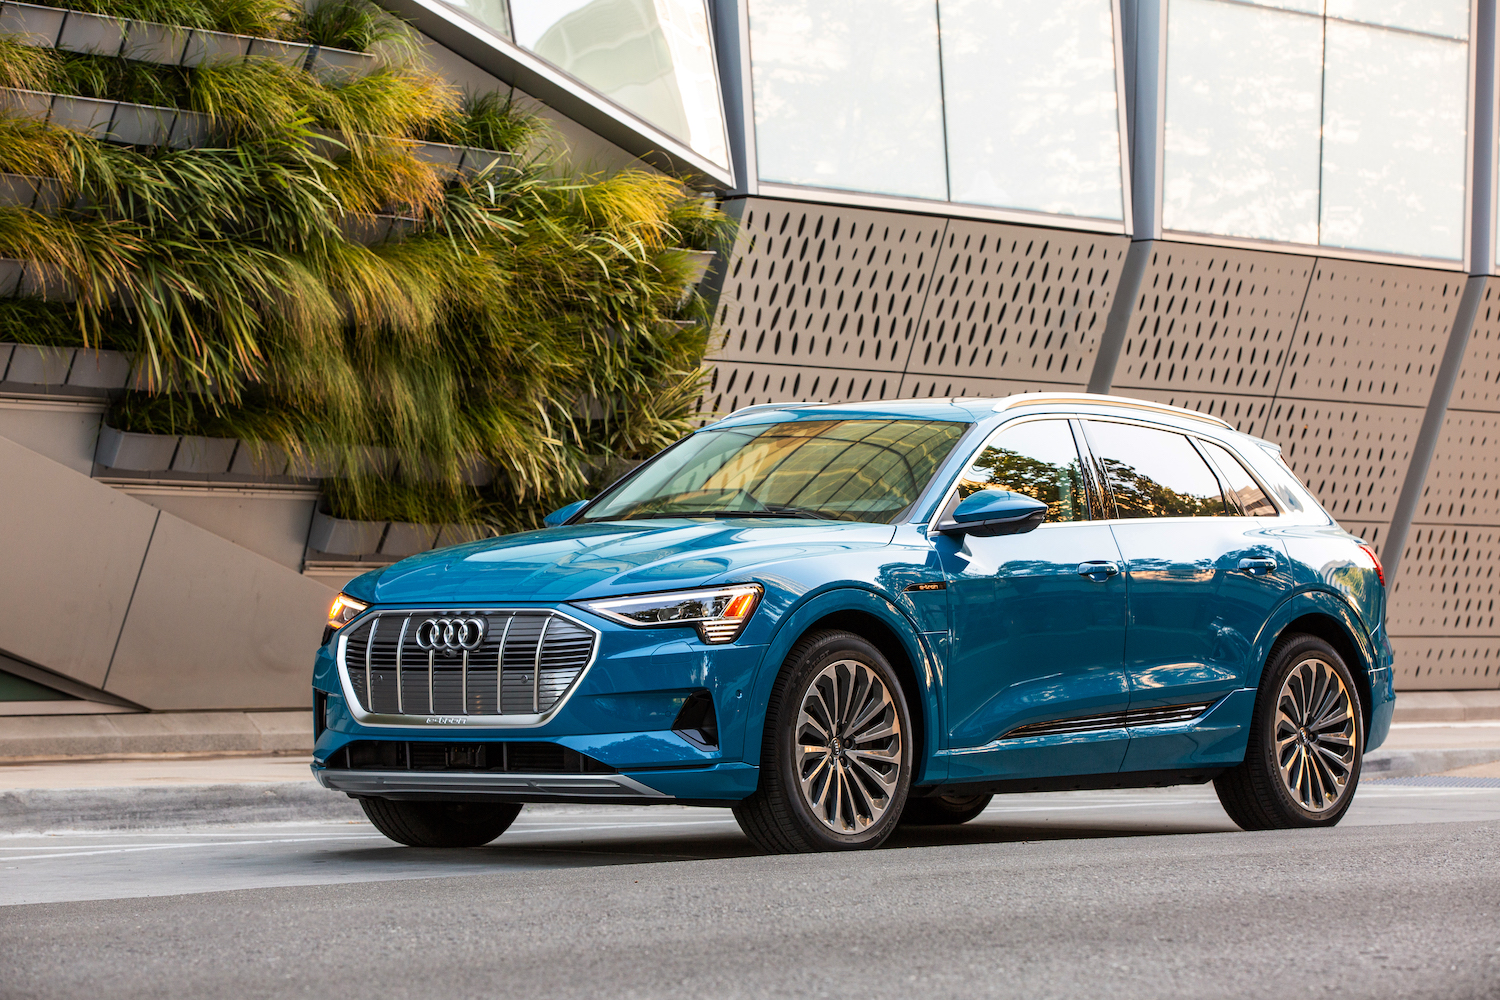 A blue 2021 Audi e-tron parked outdoors, the best luxury electric SUV